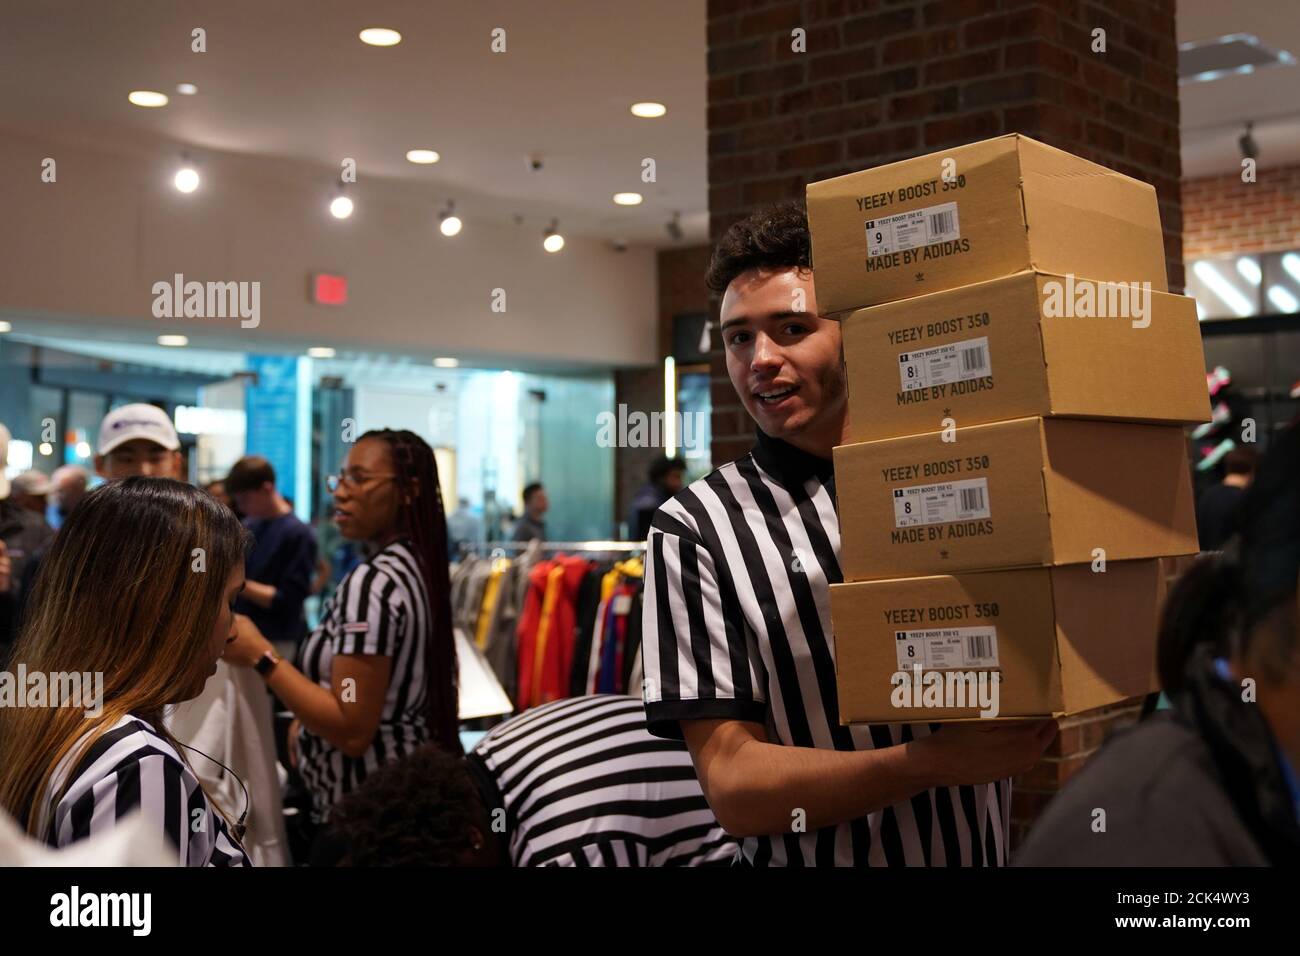 A Foot Locker employee retrieves boxes of Kanye West's Yeezy shoes in King  of Prussia mall on Black Friday, a day that kicks off the holiday shopping  season, in King of Prussia,